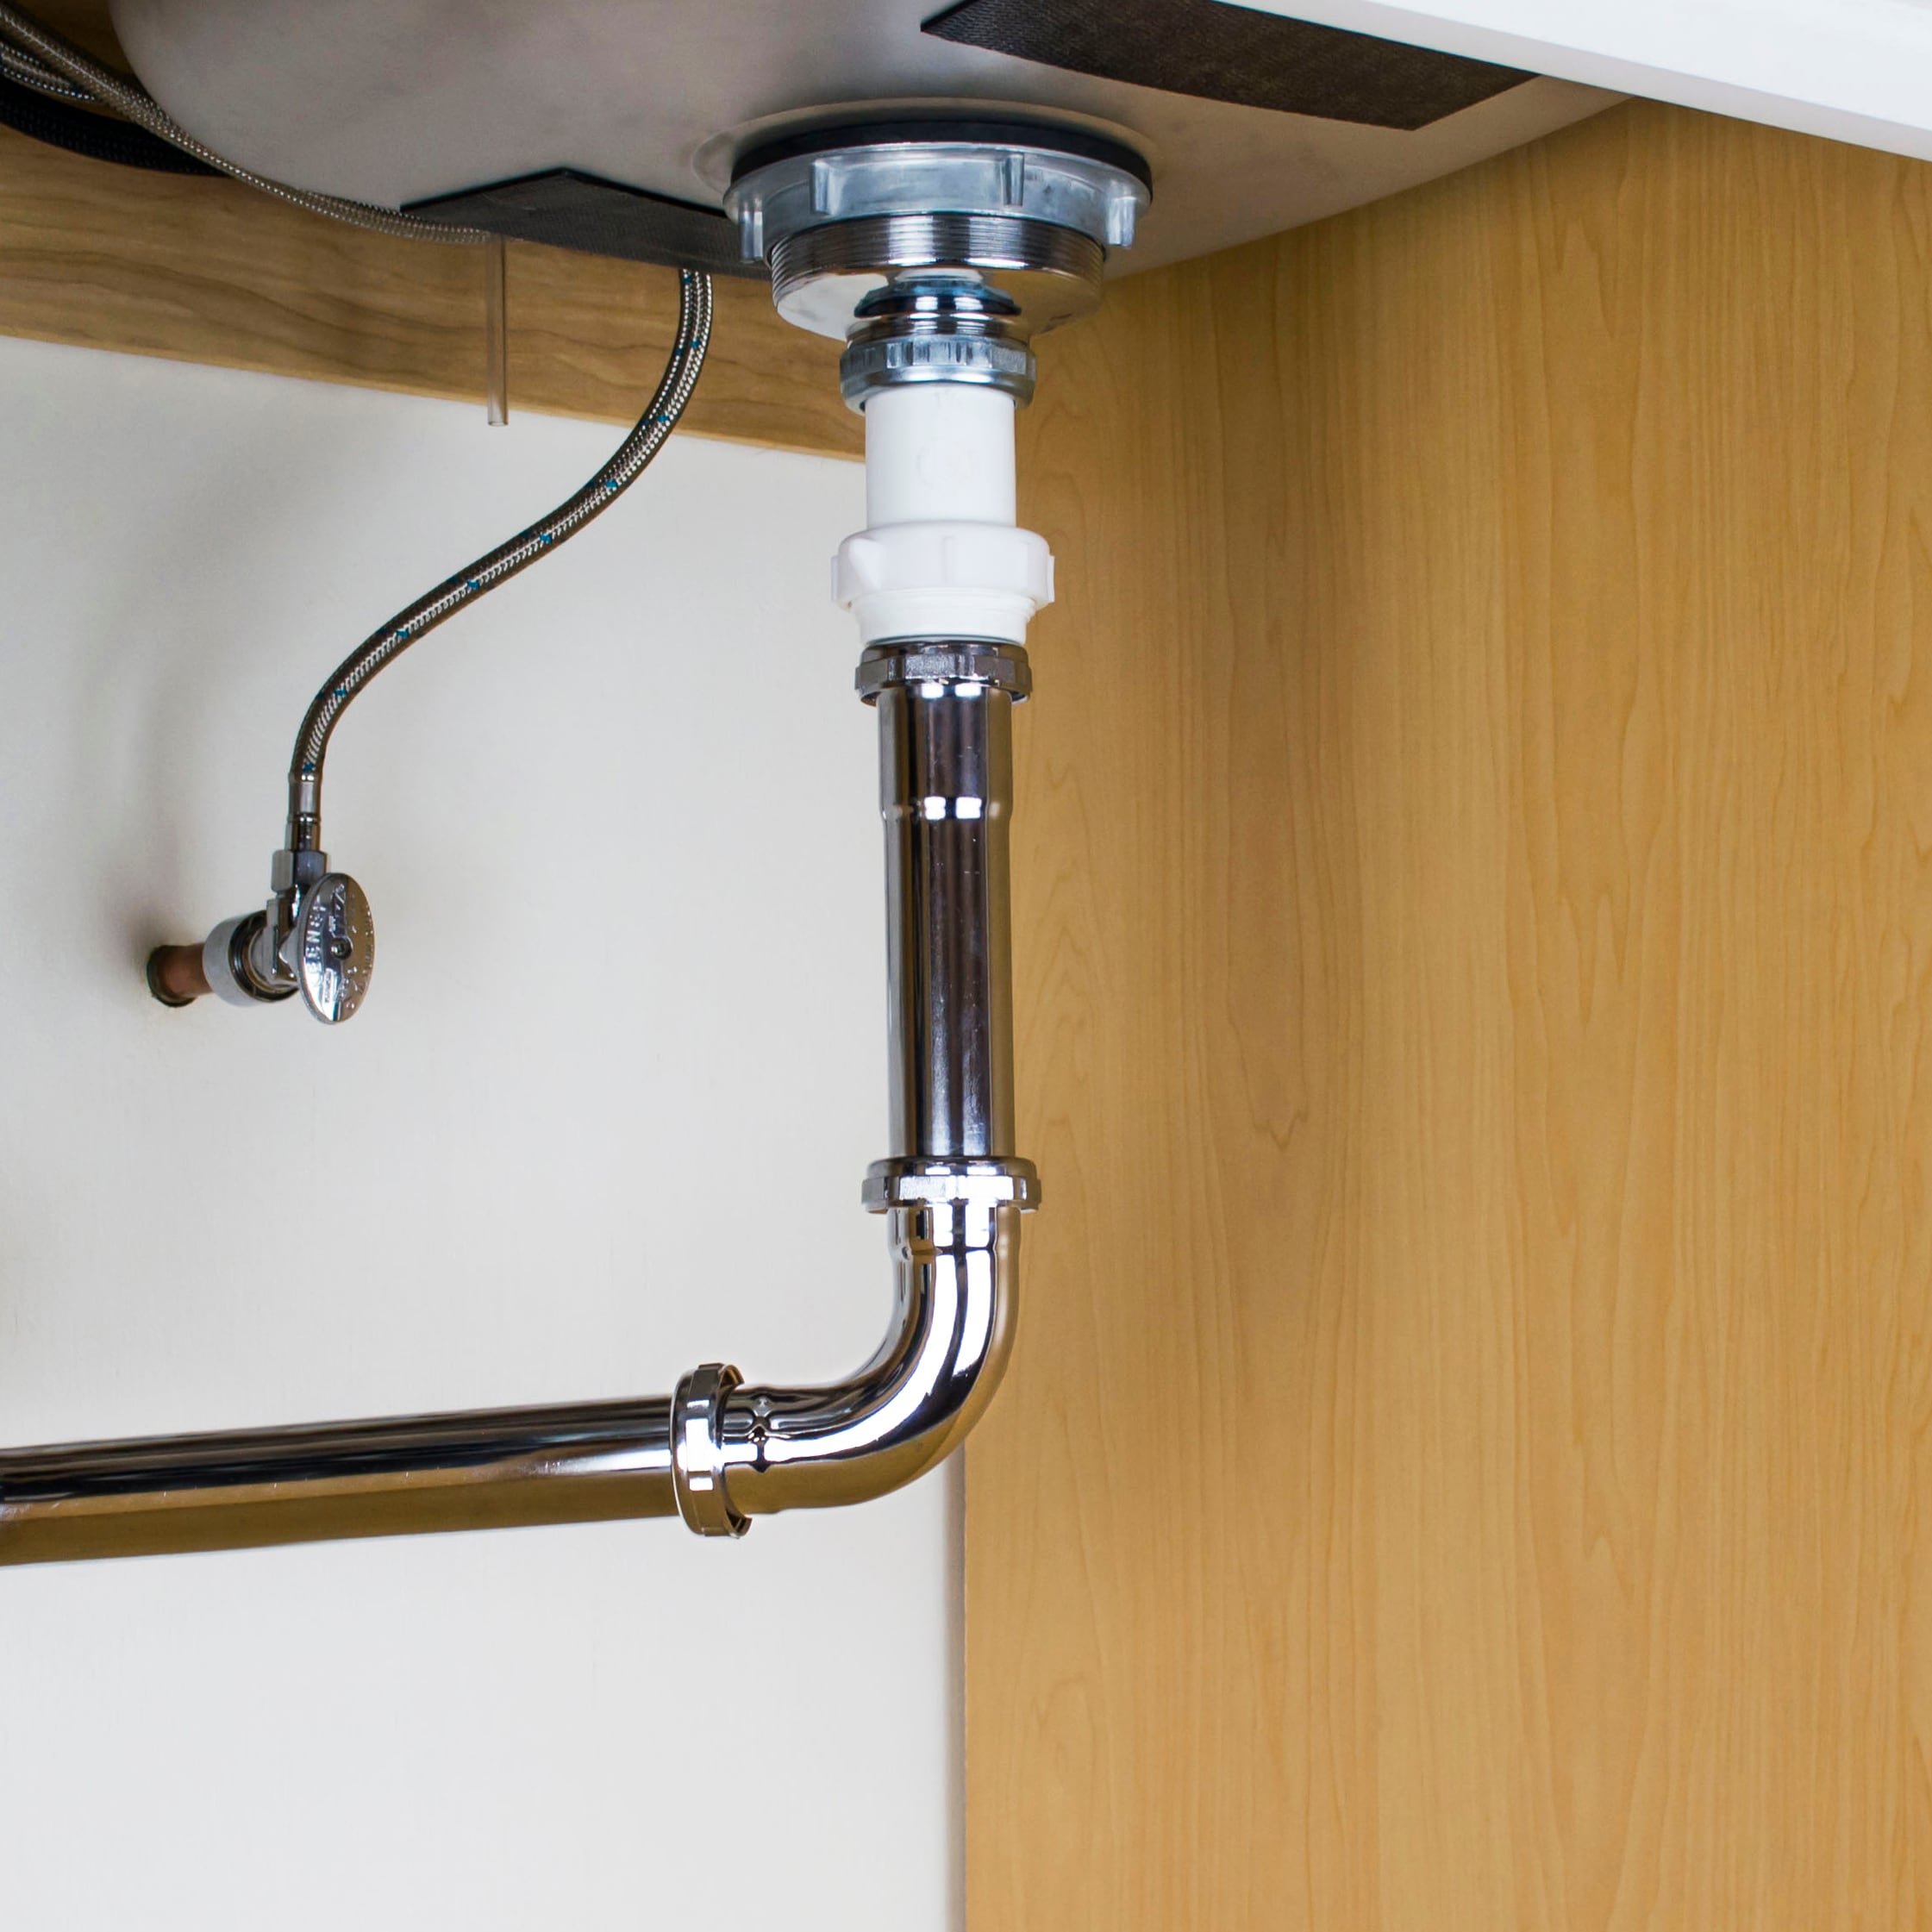 How to Seal Plumbing Pipes Under Sink: A Guide - R.S. Andrews